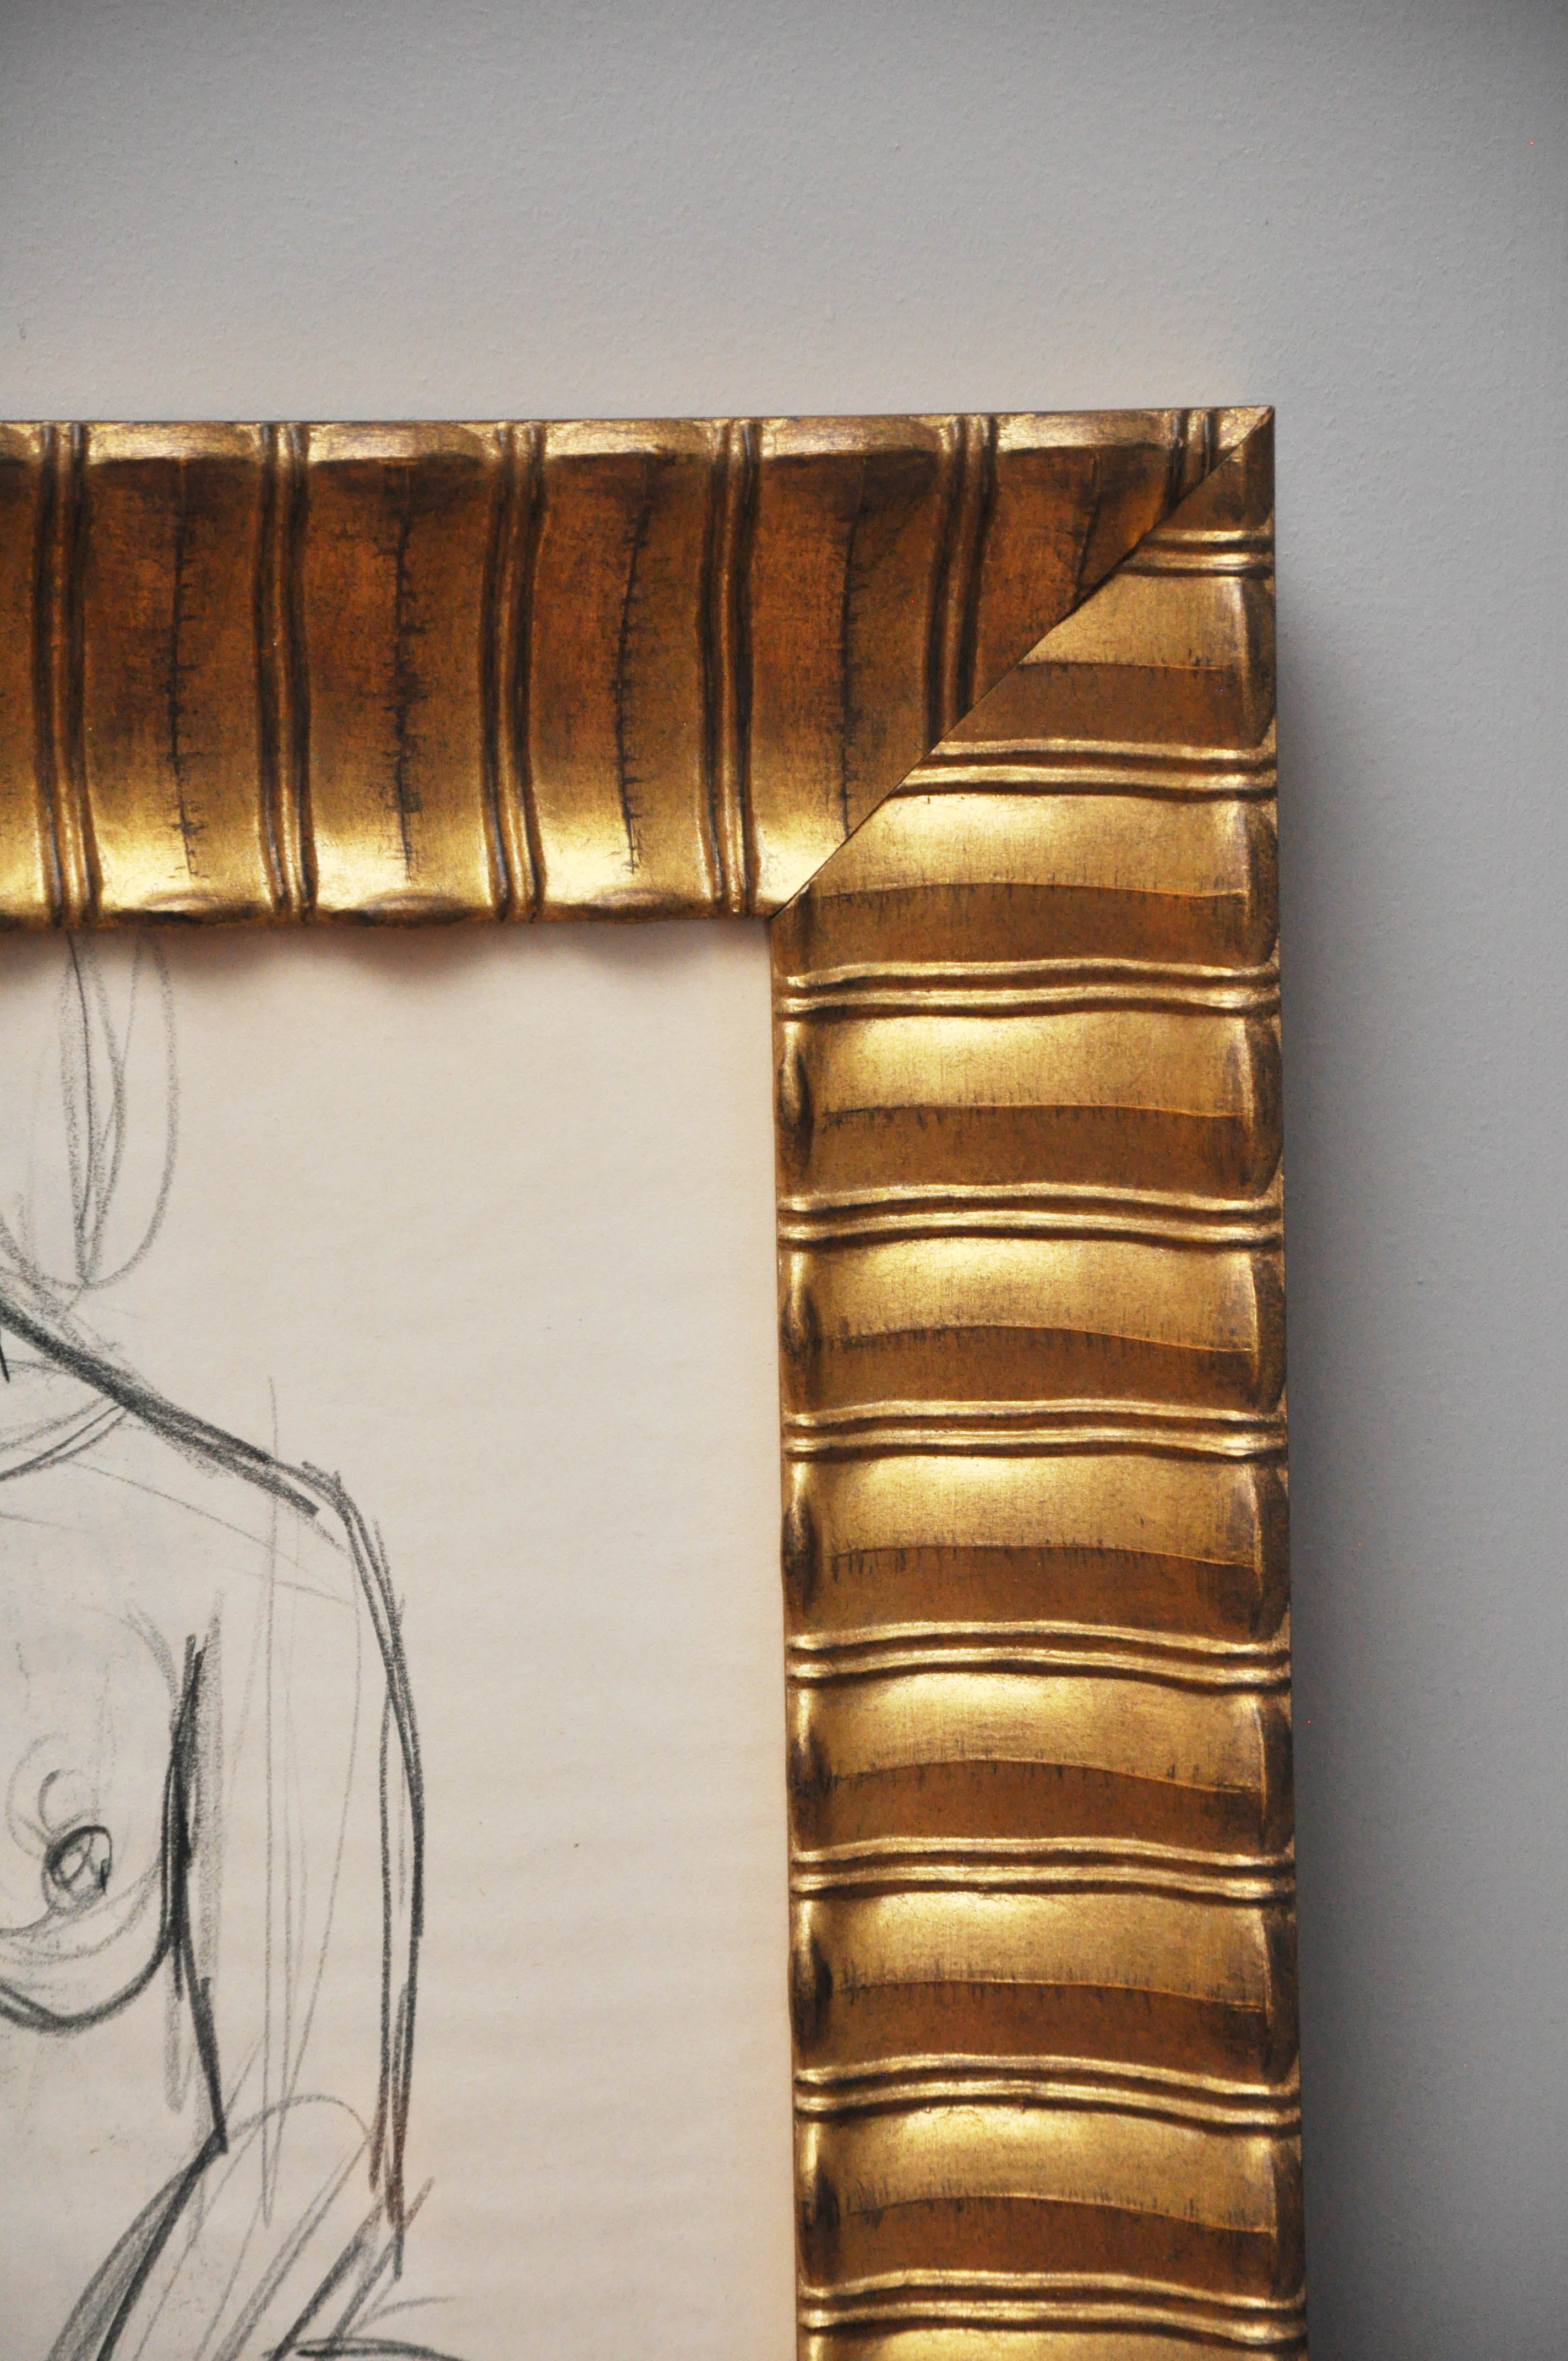 20th century nude: line drawing in hand gilded frame.

Dimensions: 26